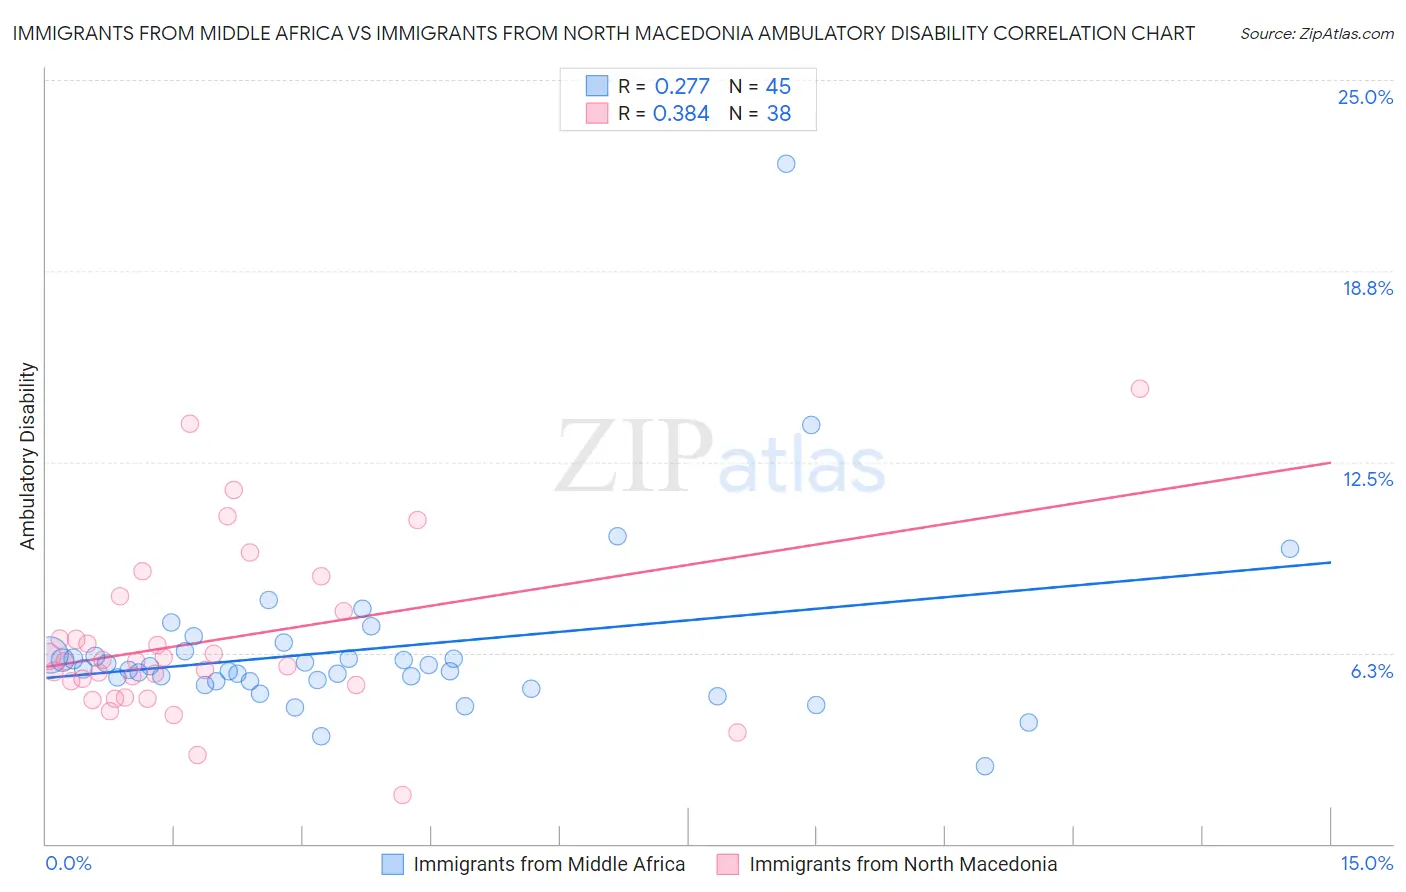 Immigrants from Middle Africa vs Immigrants from North Macedonia Ambulatory Disability